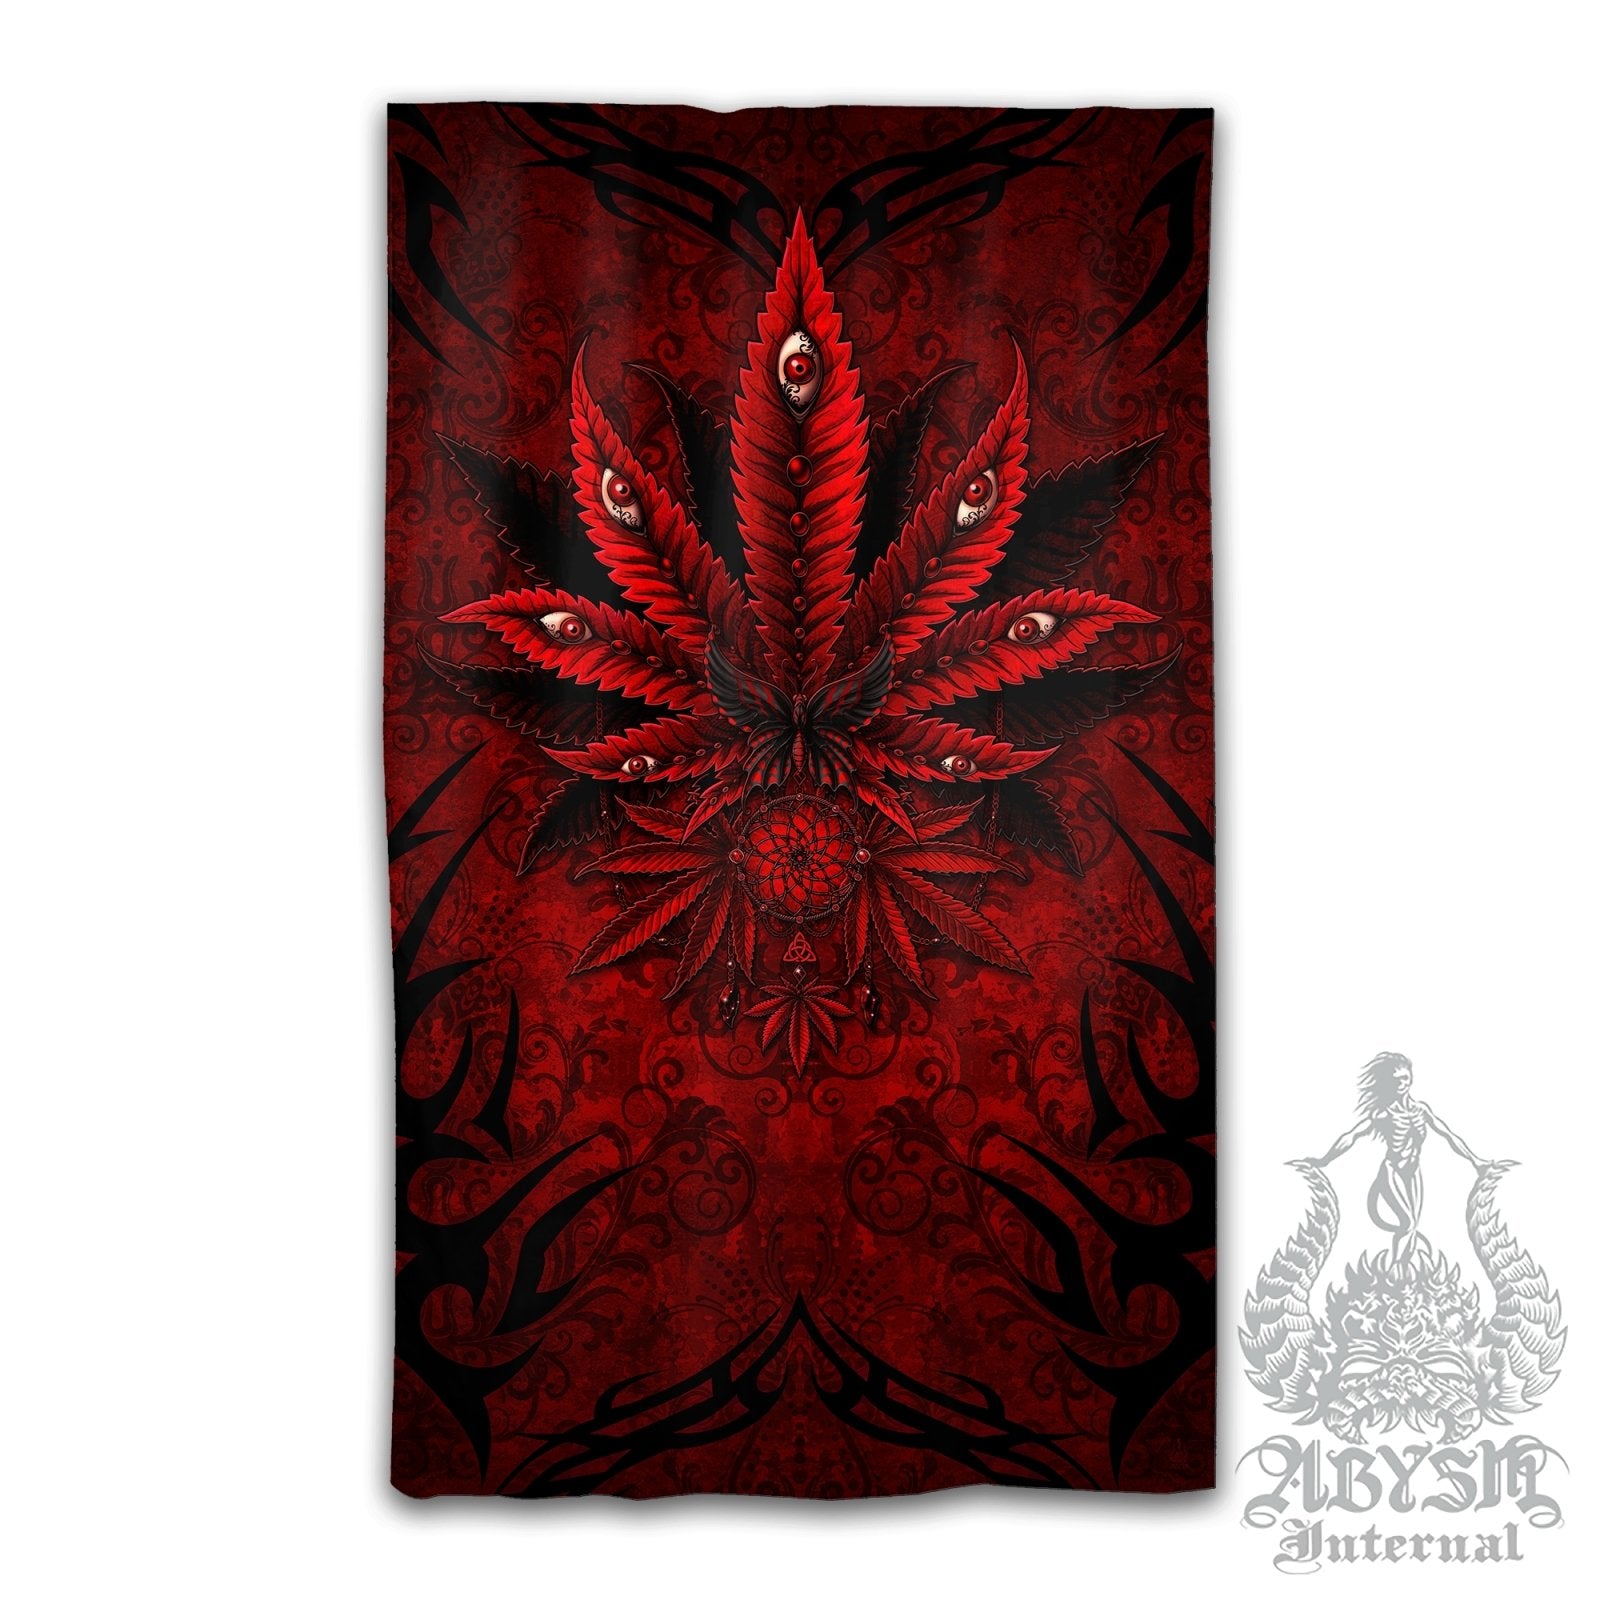 Gothic Weed Blackout Curtains, Cannabis Home and Shop Decor, Long Window Panels, Indie 420 Room Art Print - Bloody Goth - Abysm Internal